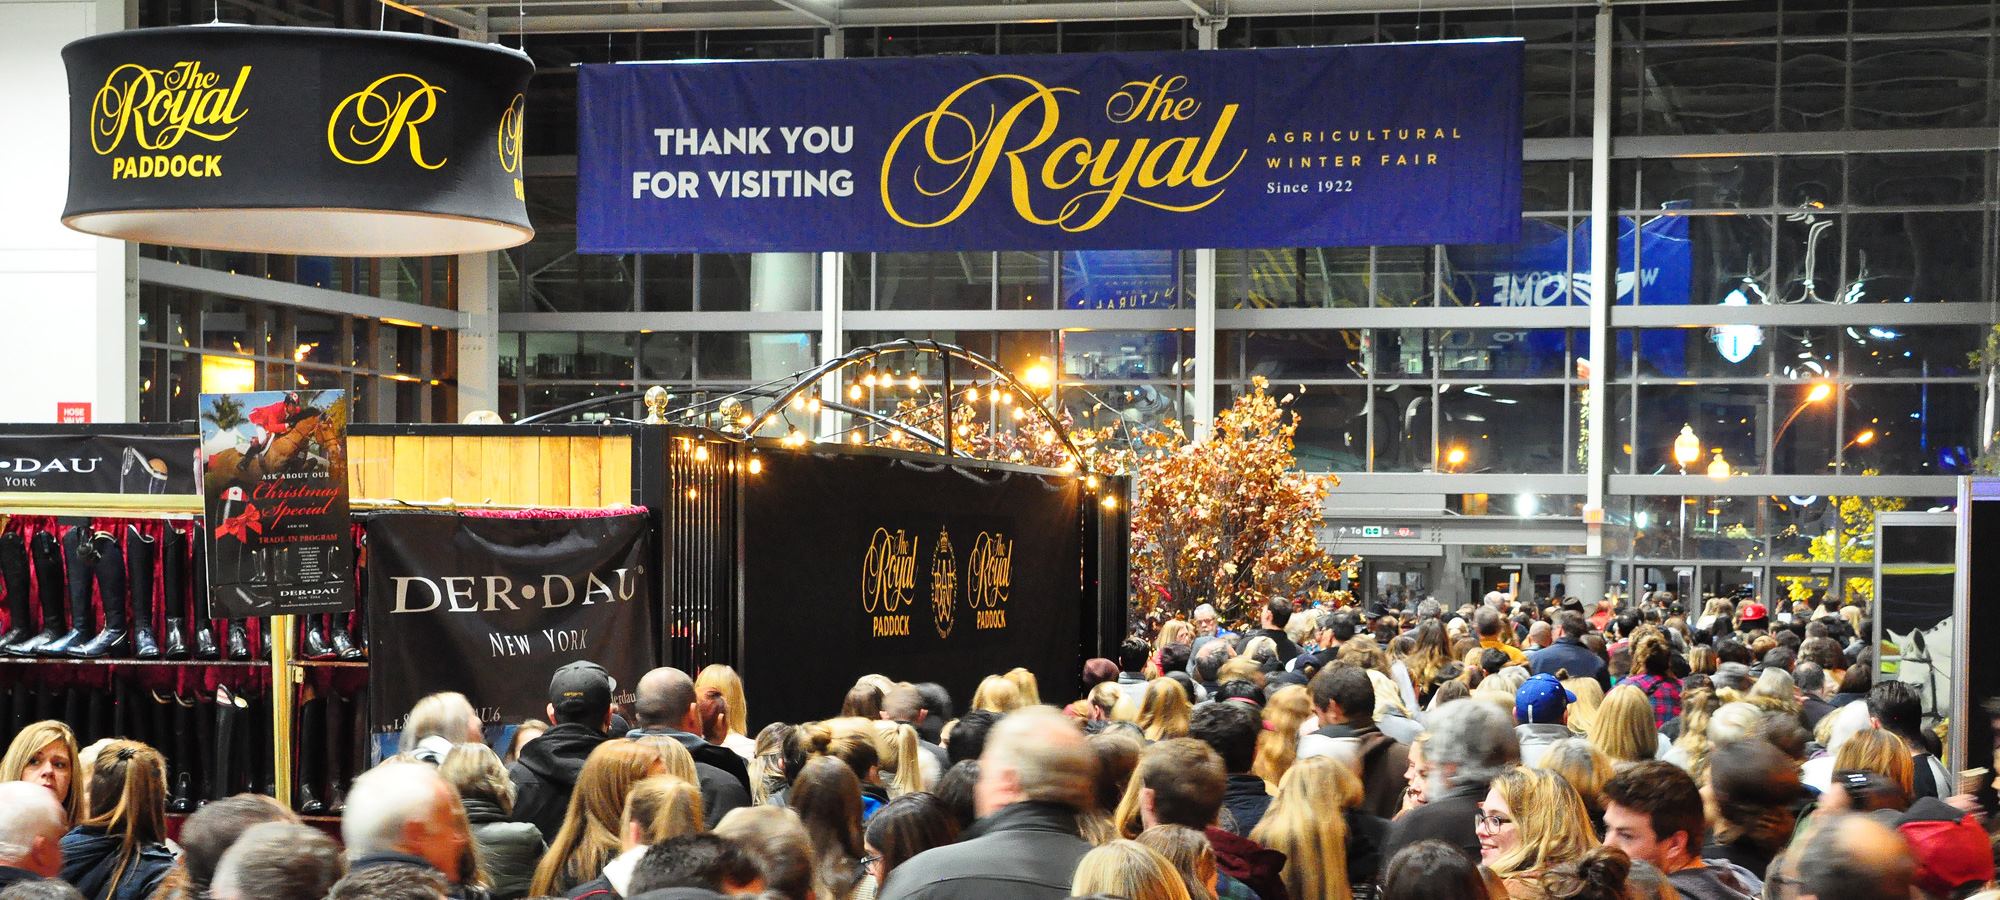 17-facts-about-royal-agricultural-winter-fair